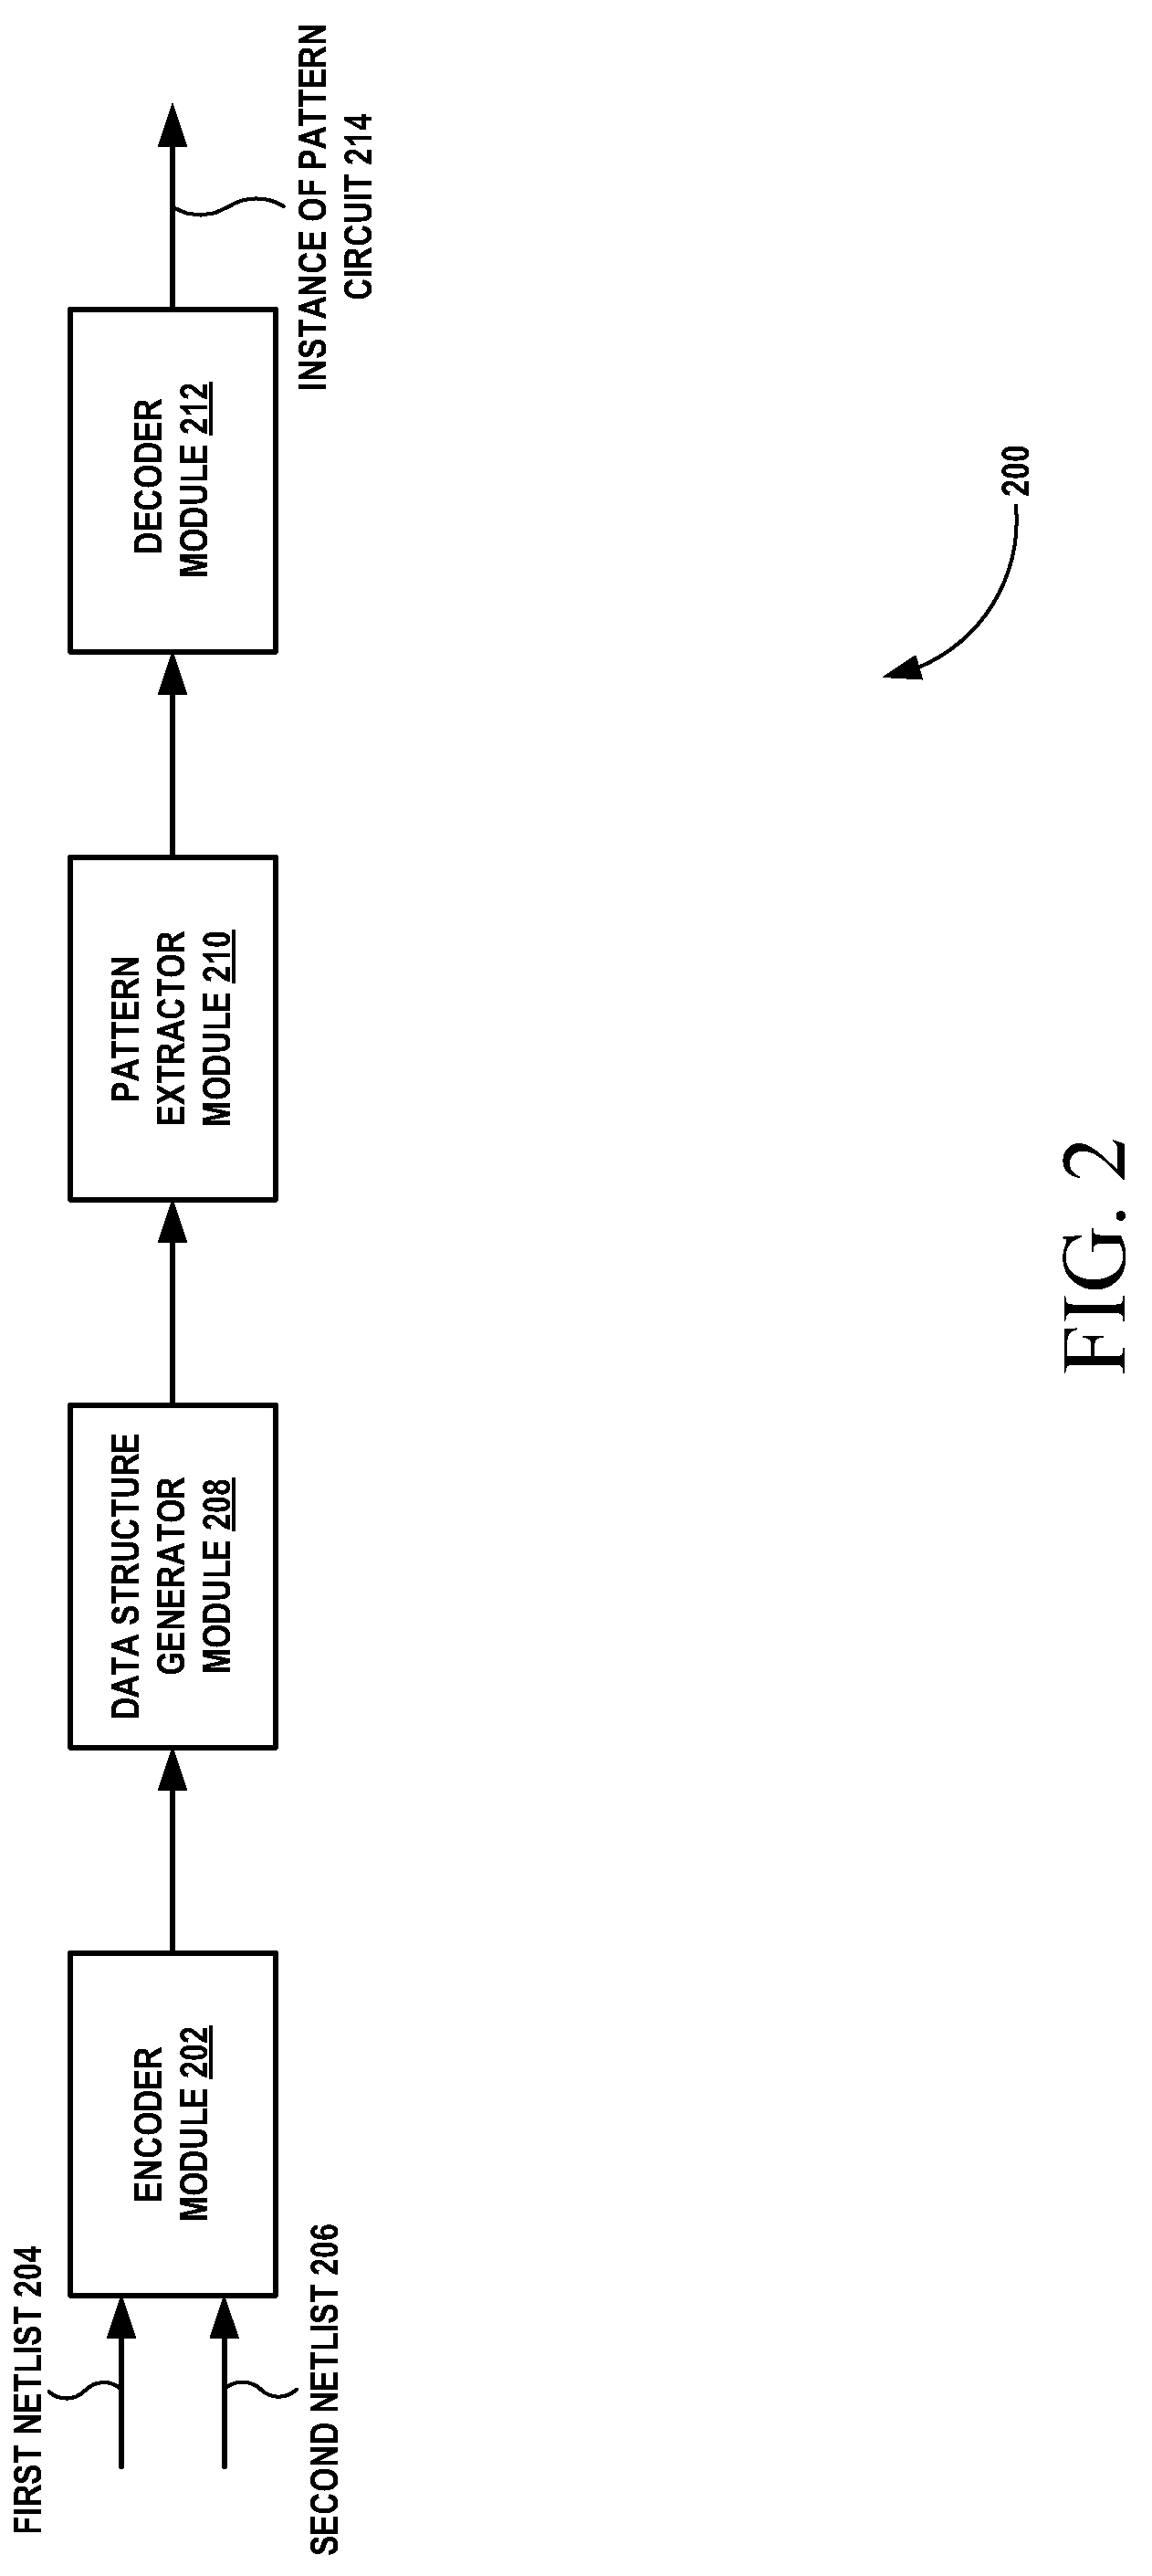 Sub-circuit pattern recognition in integrated circuit design